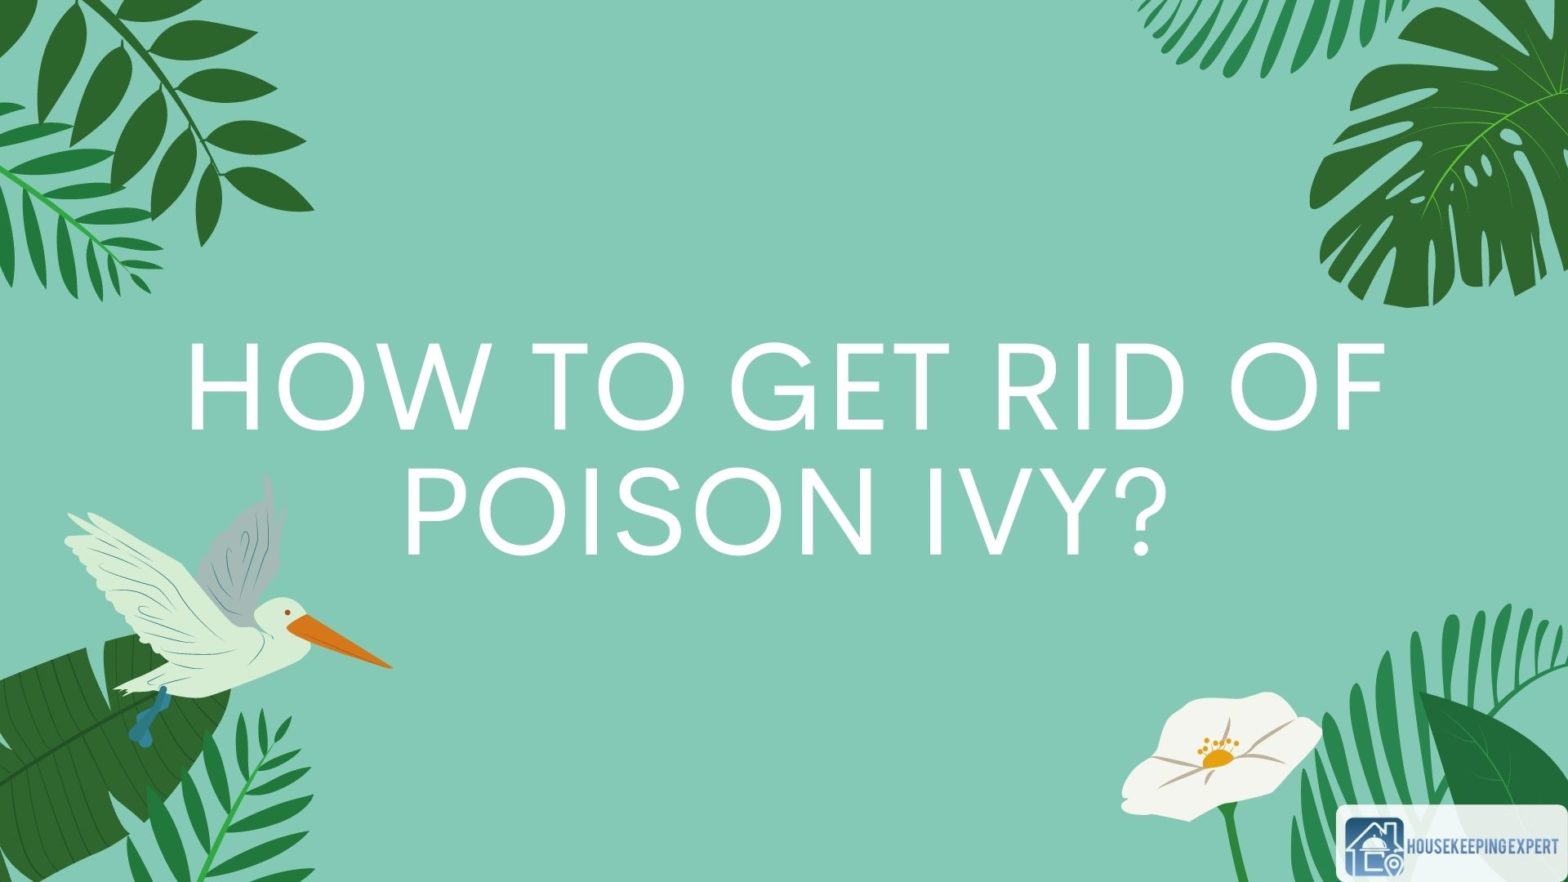 How To Get Rid Of Poison Ivy